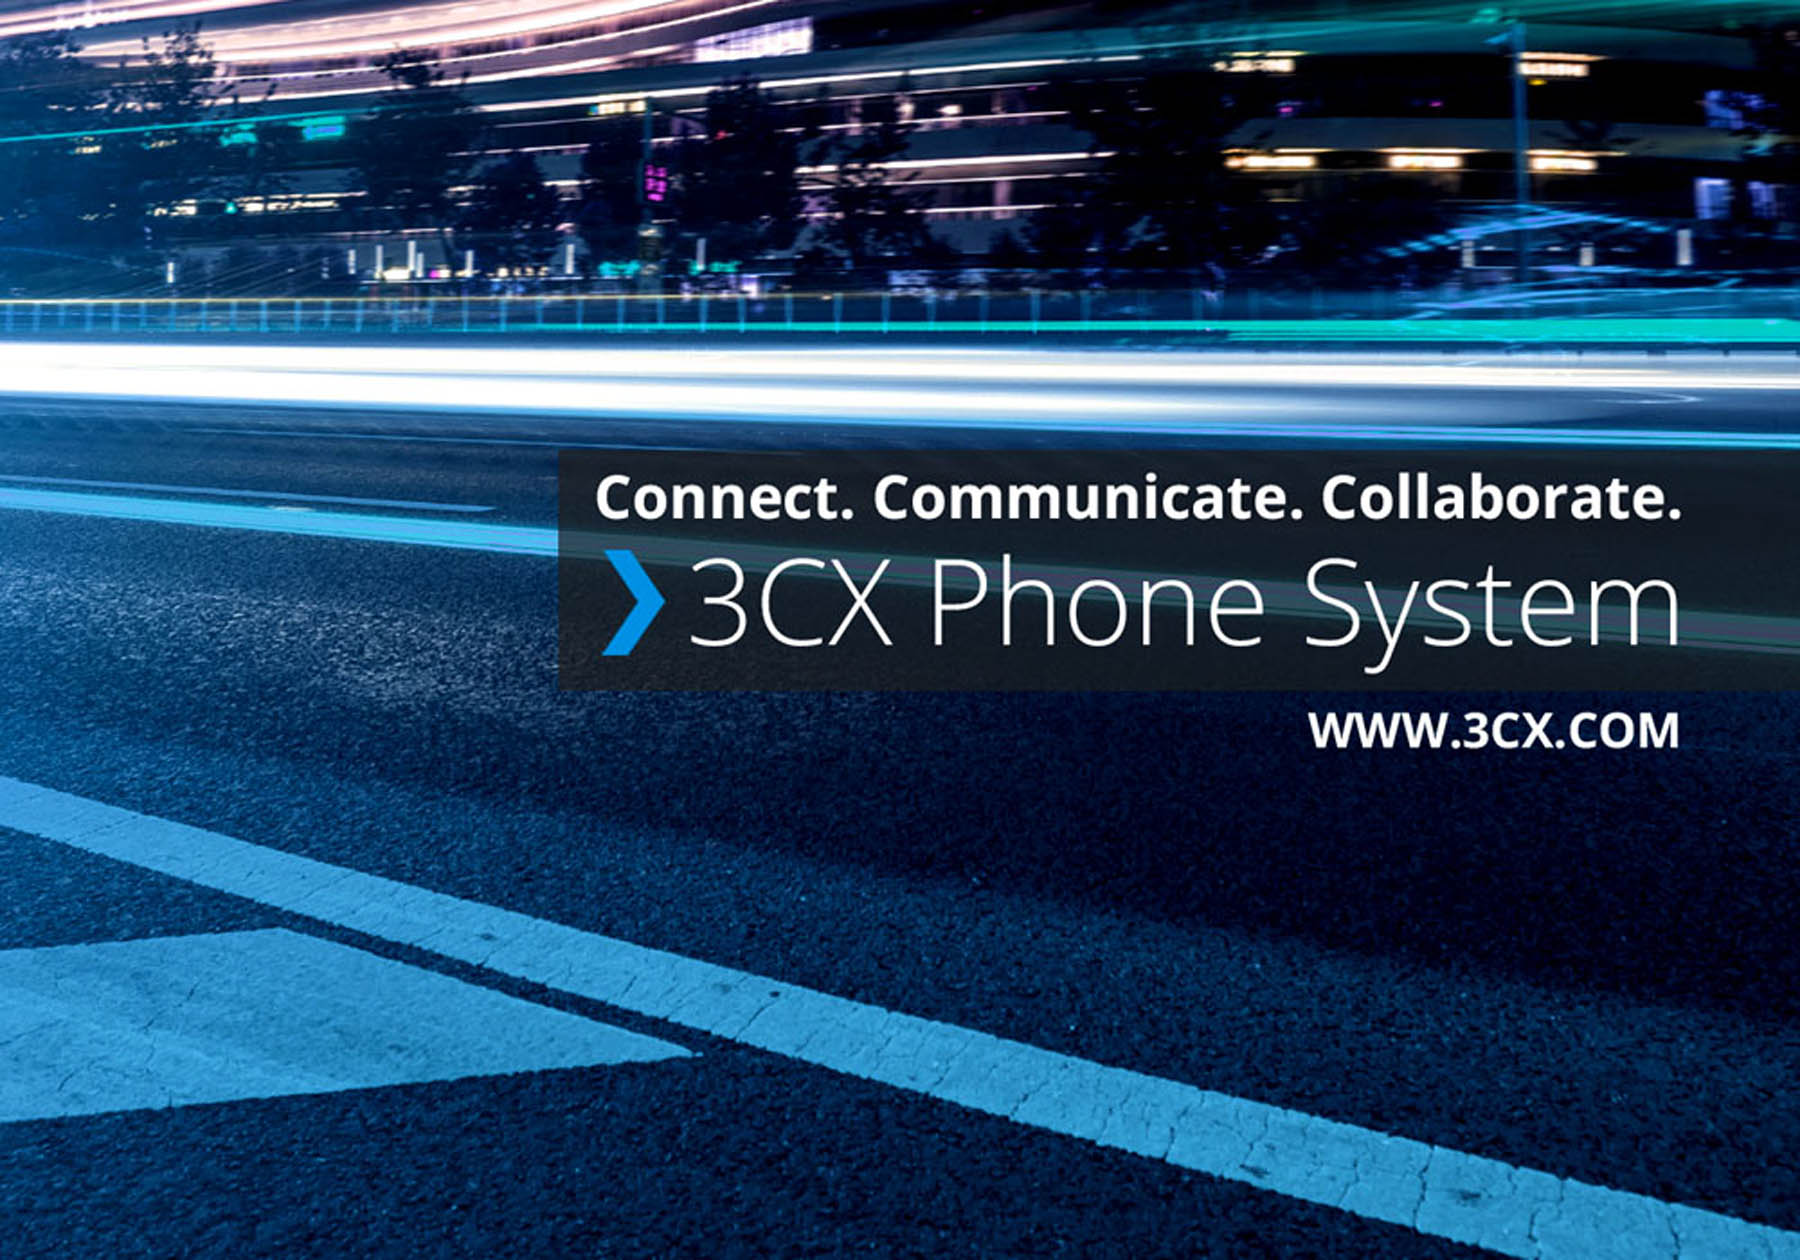 Connect, Communinate and Collaborate with the 3CX Phone System